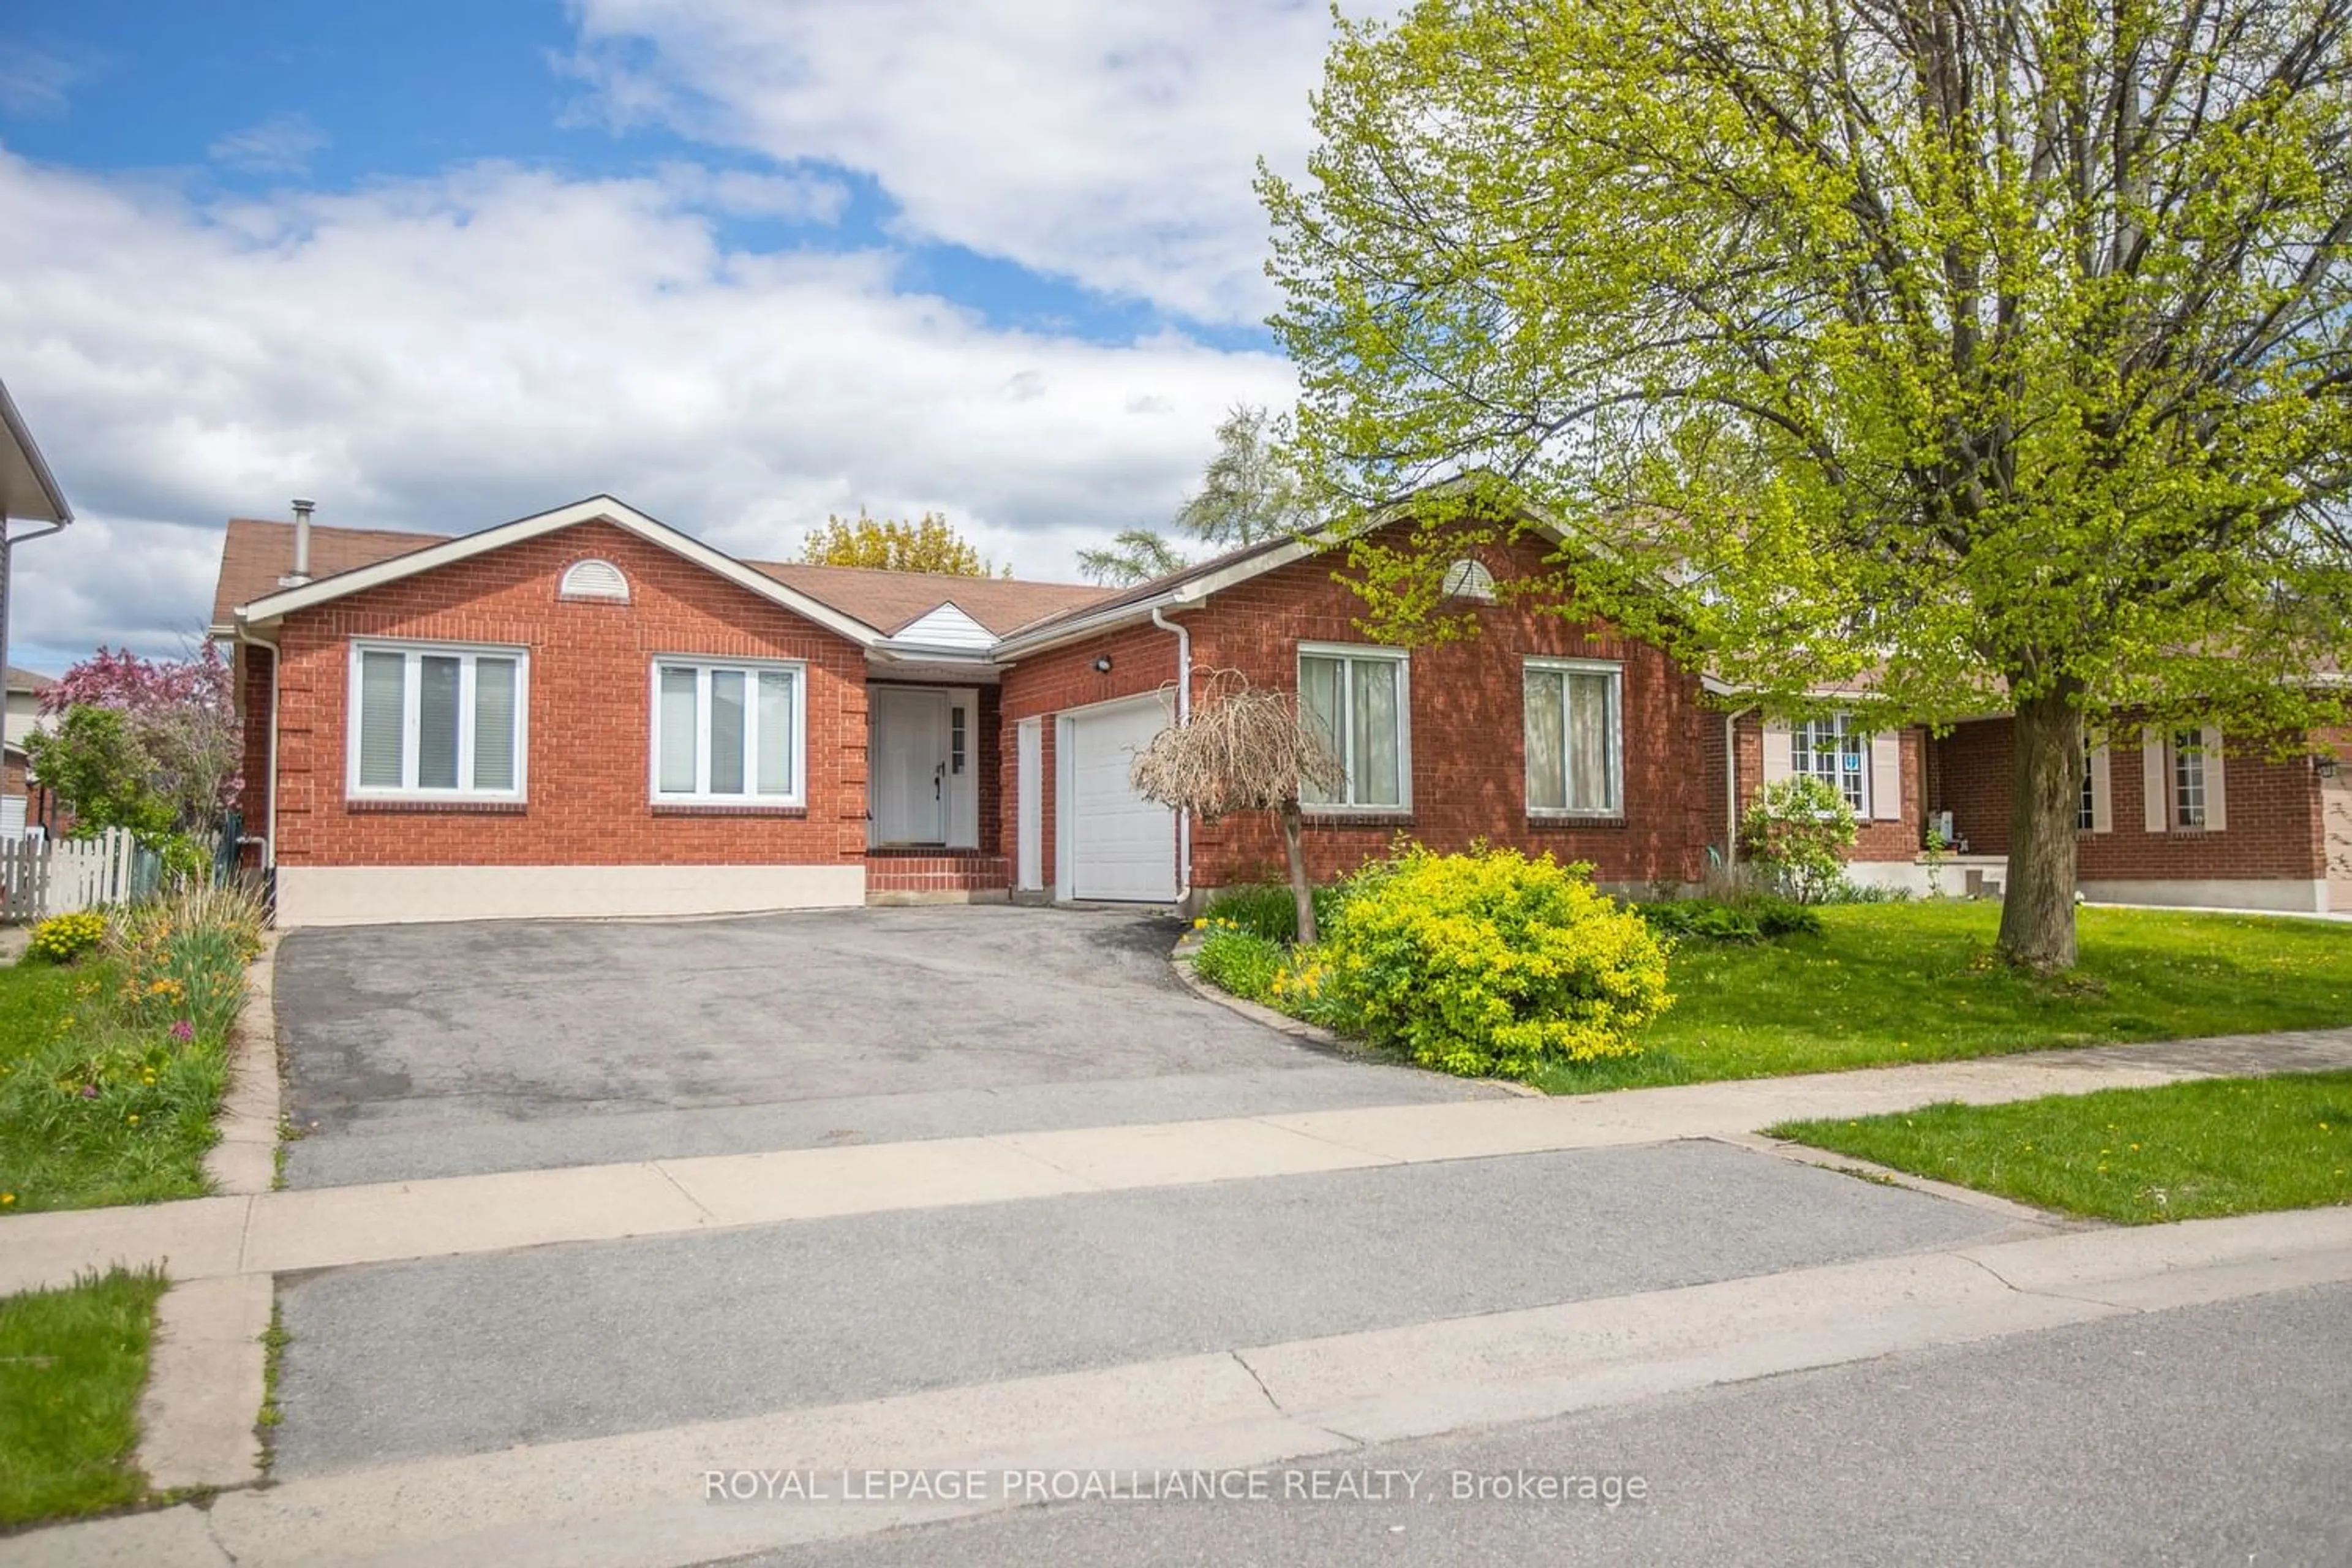 Home with brick exterior material for 127 Greenlees Dr, Kingston Ontario K7K 6R5